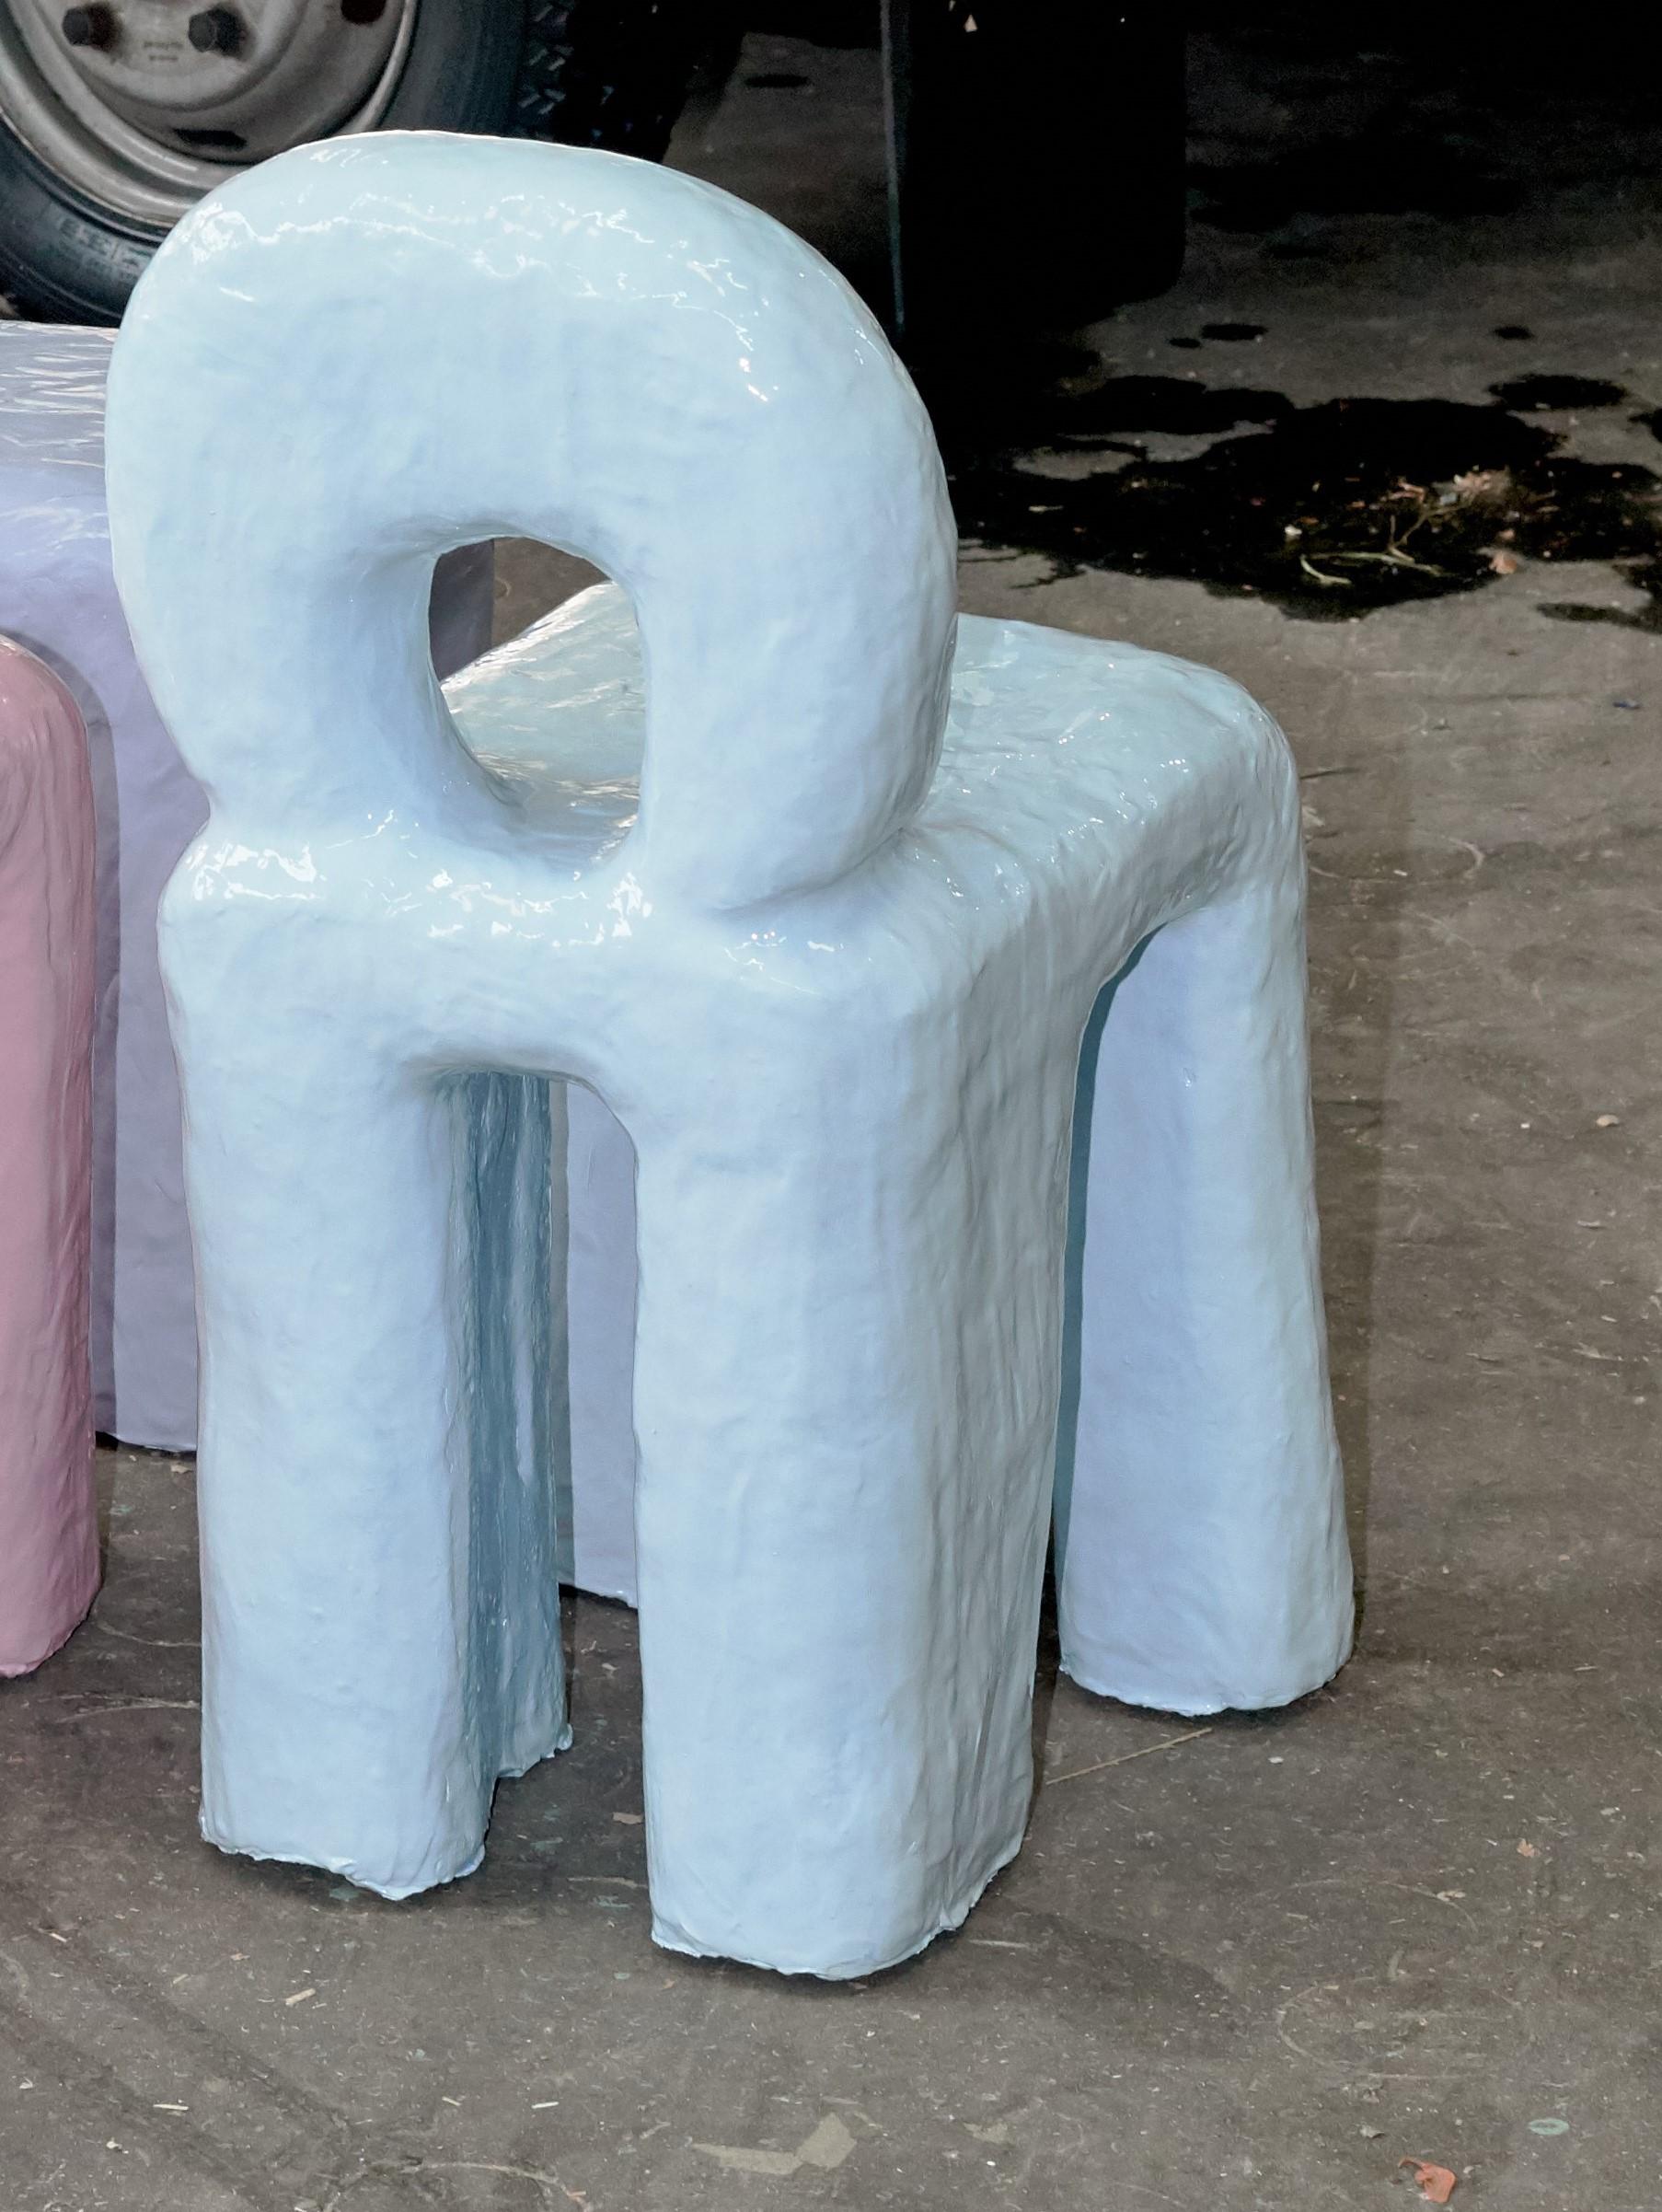 Funky stool made in 467 minutes by Minute Manufacturing
Dimensions: 42 x 42 x 56 cm
Materials: Waste materials
Such as cardboard tubes, plastic boxes, leather, clay

Minute Manufacturing is a production system that makes objects by the minute.